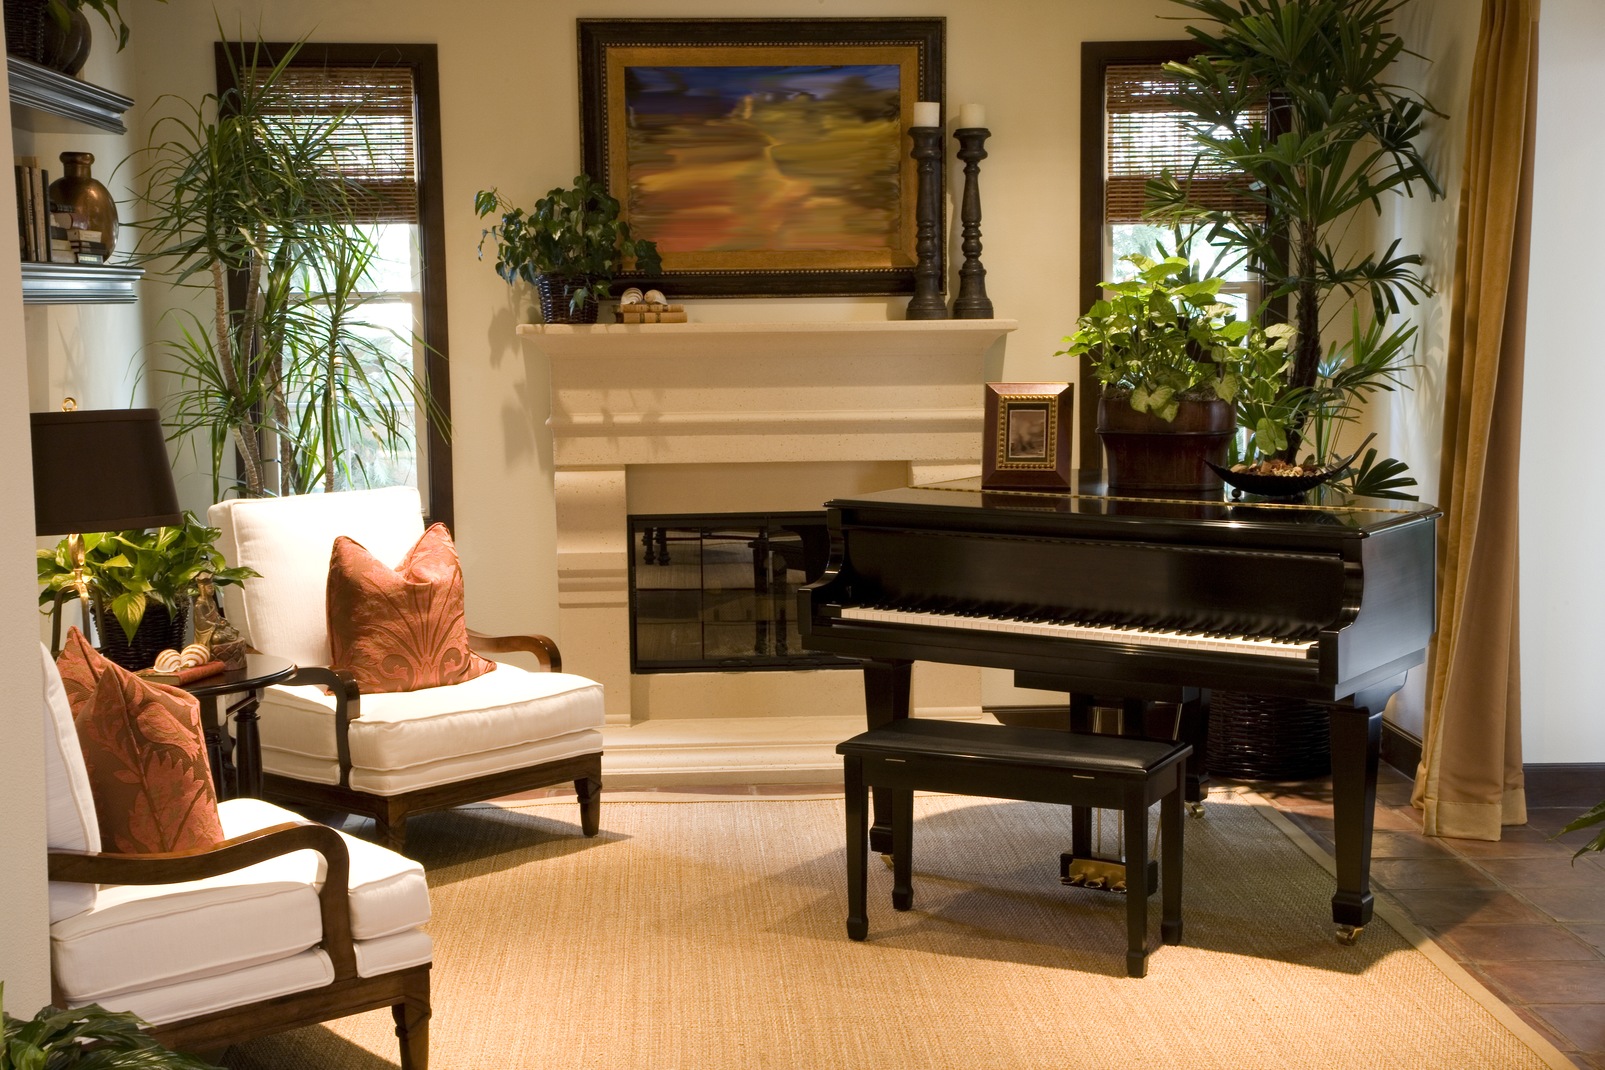 Upright Piano In Living Room Layout